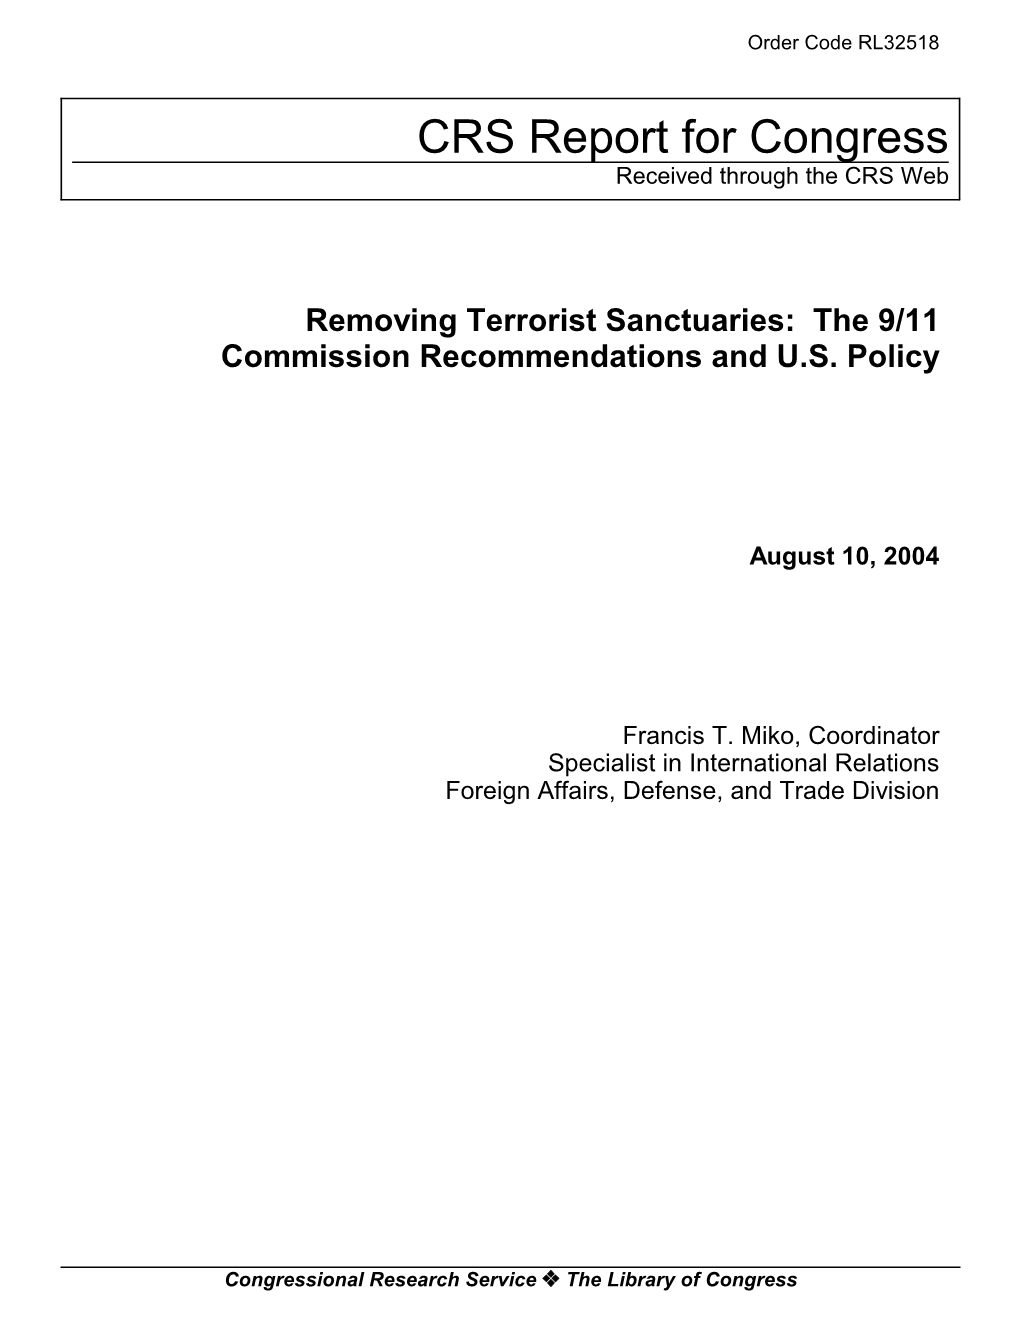 Removing Terrorist Sanctuaries: the 9/11 Commission Recommendations and U.S